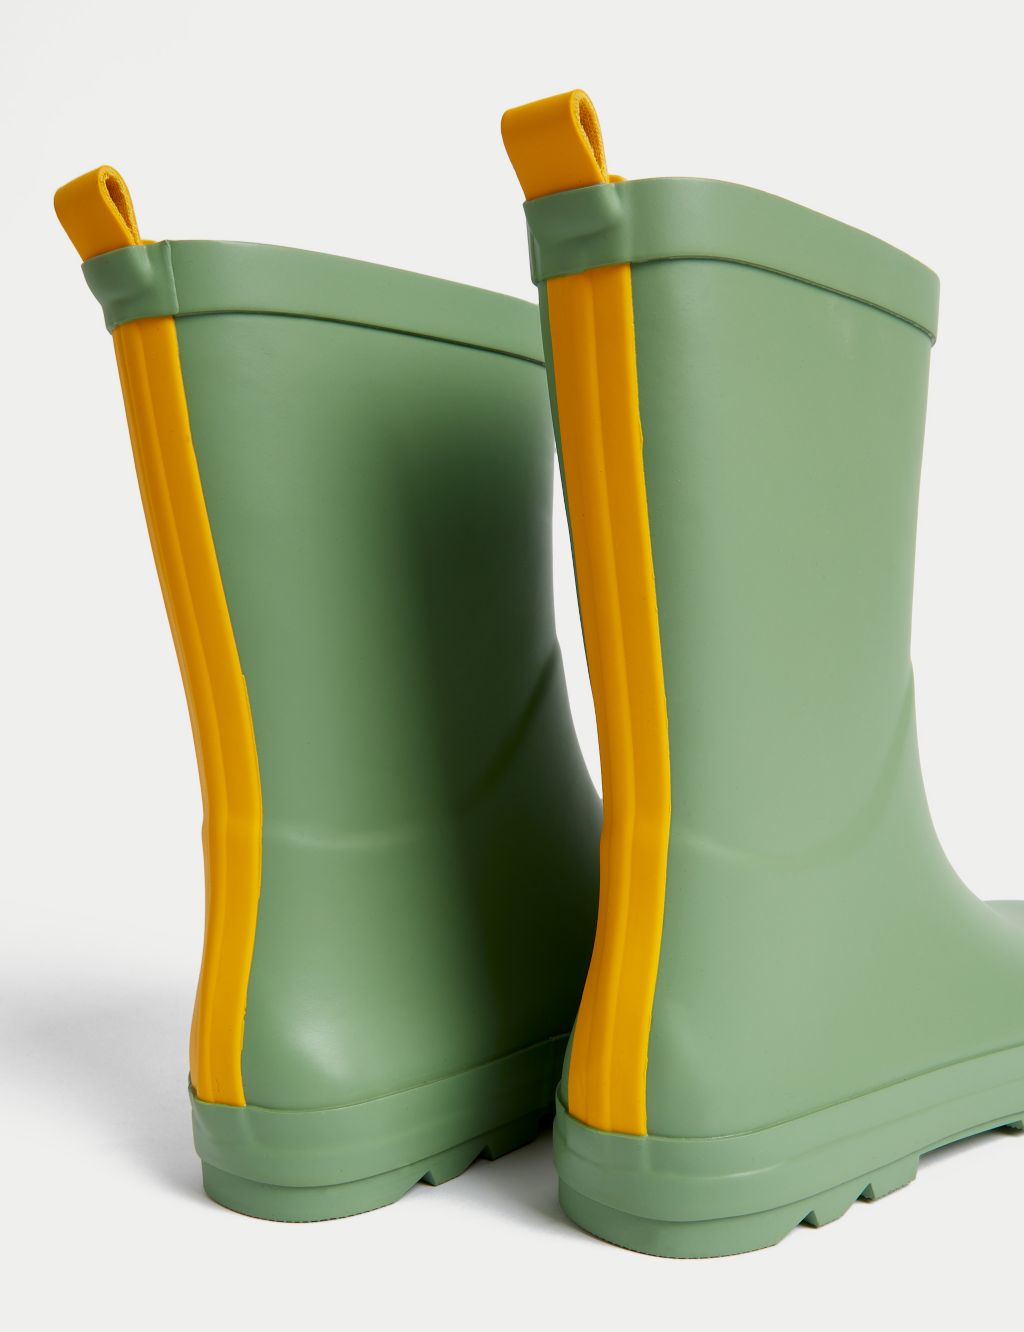 Kids' Wellies (4 Small - 7 Large) image 4